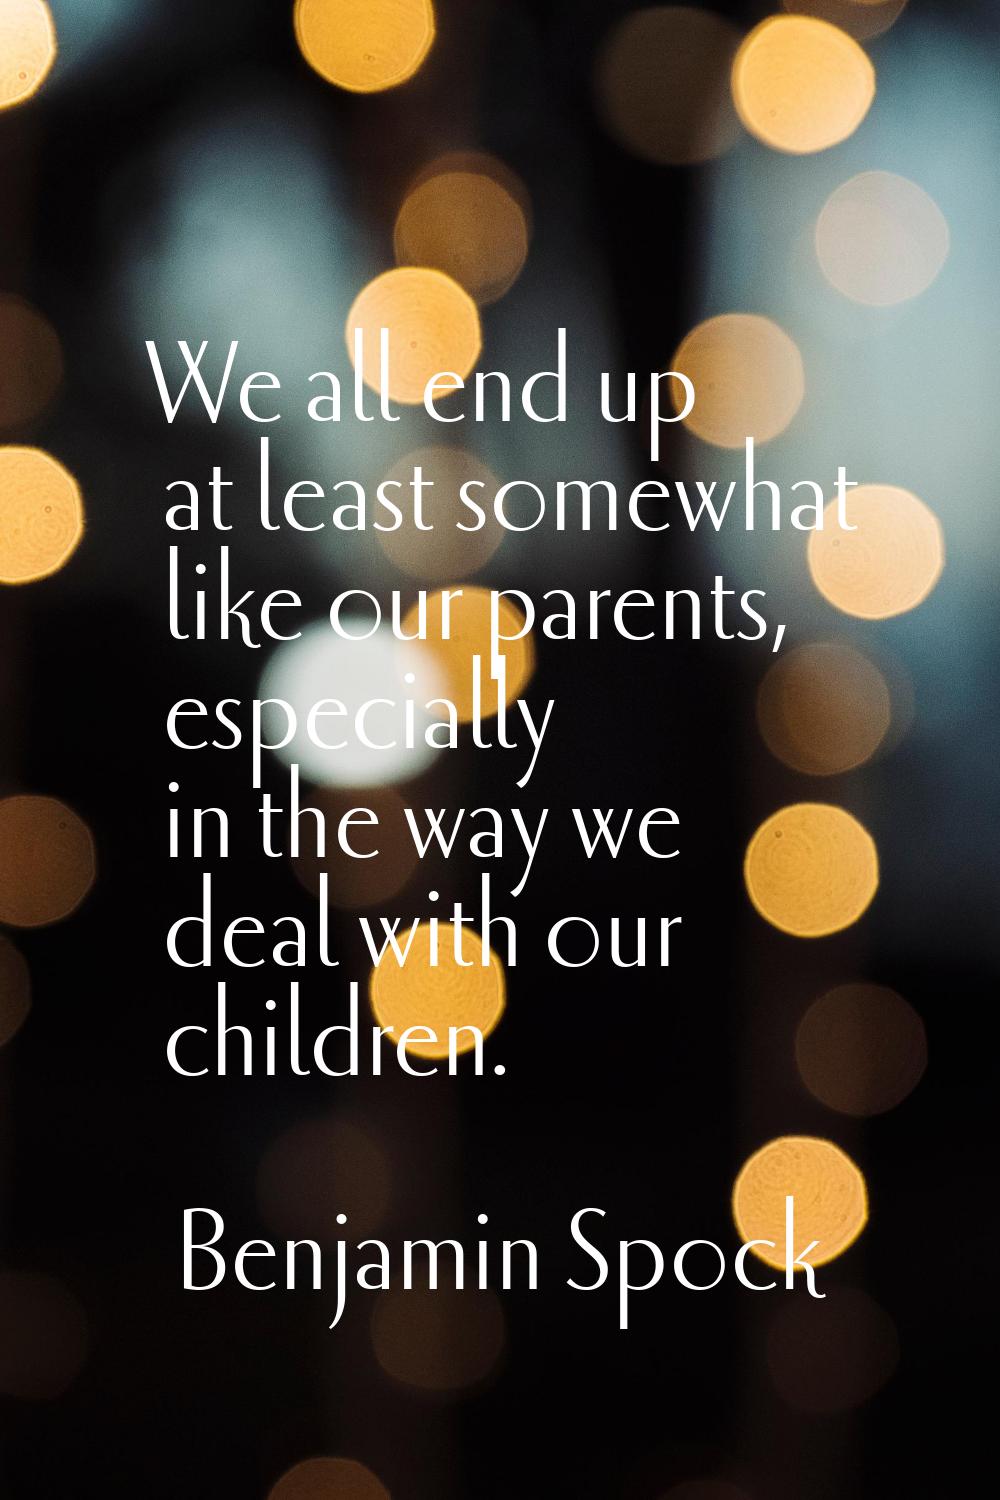 We all end up at least somewhat like our parents, especially in the way we deal with our children.